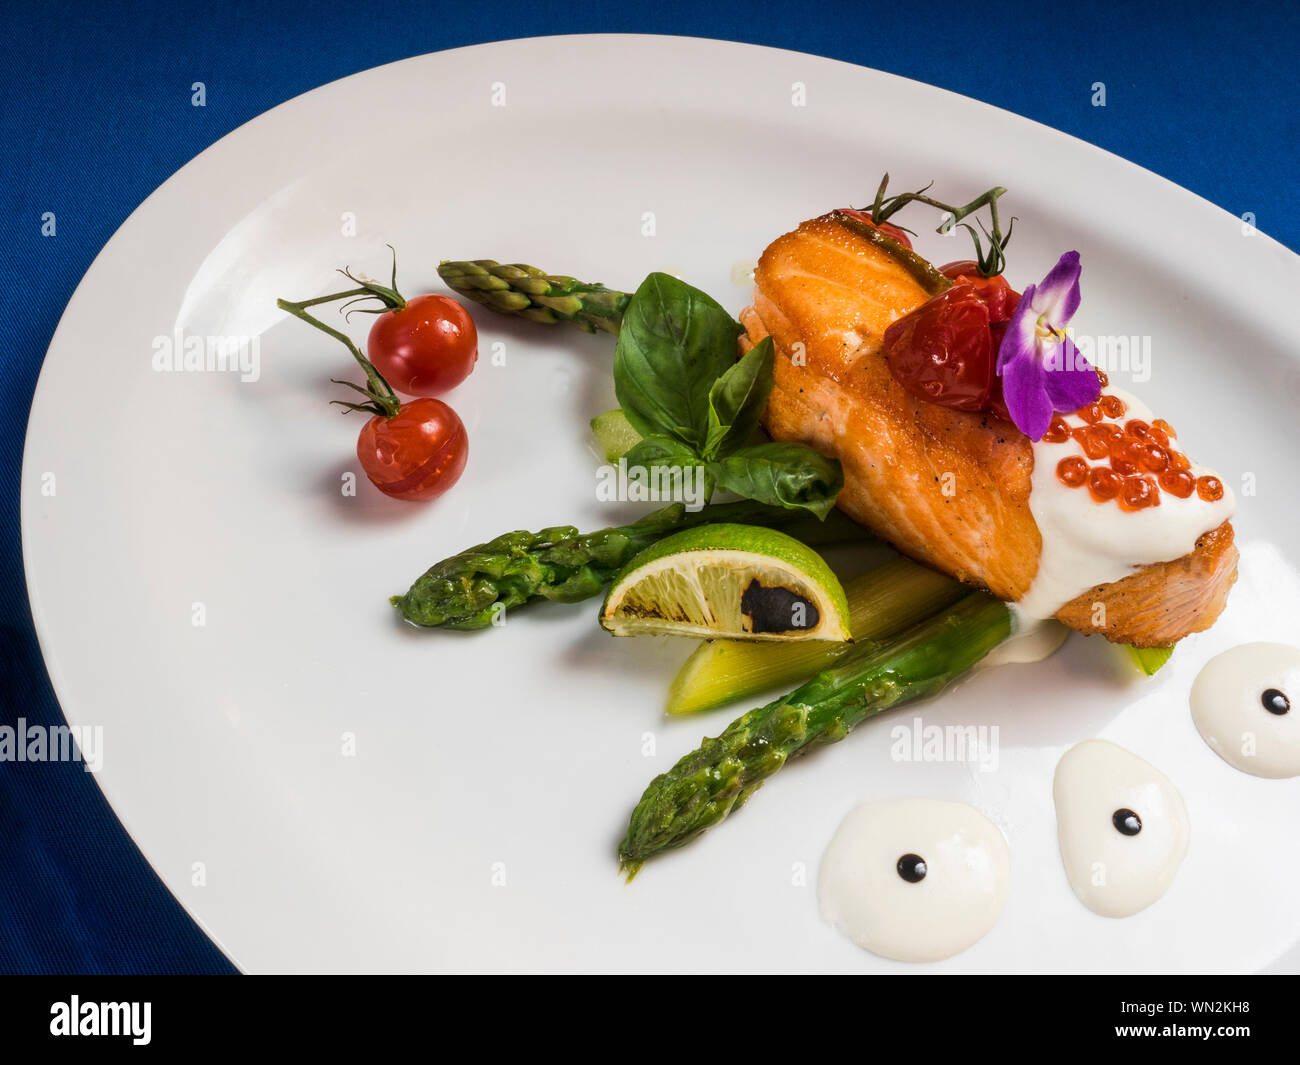 Fried Trout With Cream Sauce And Garnish Of Asparagus And Tomatoes Stock Photo